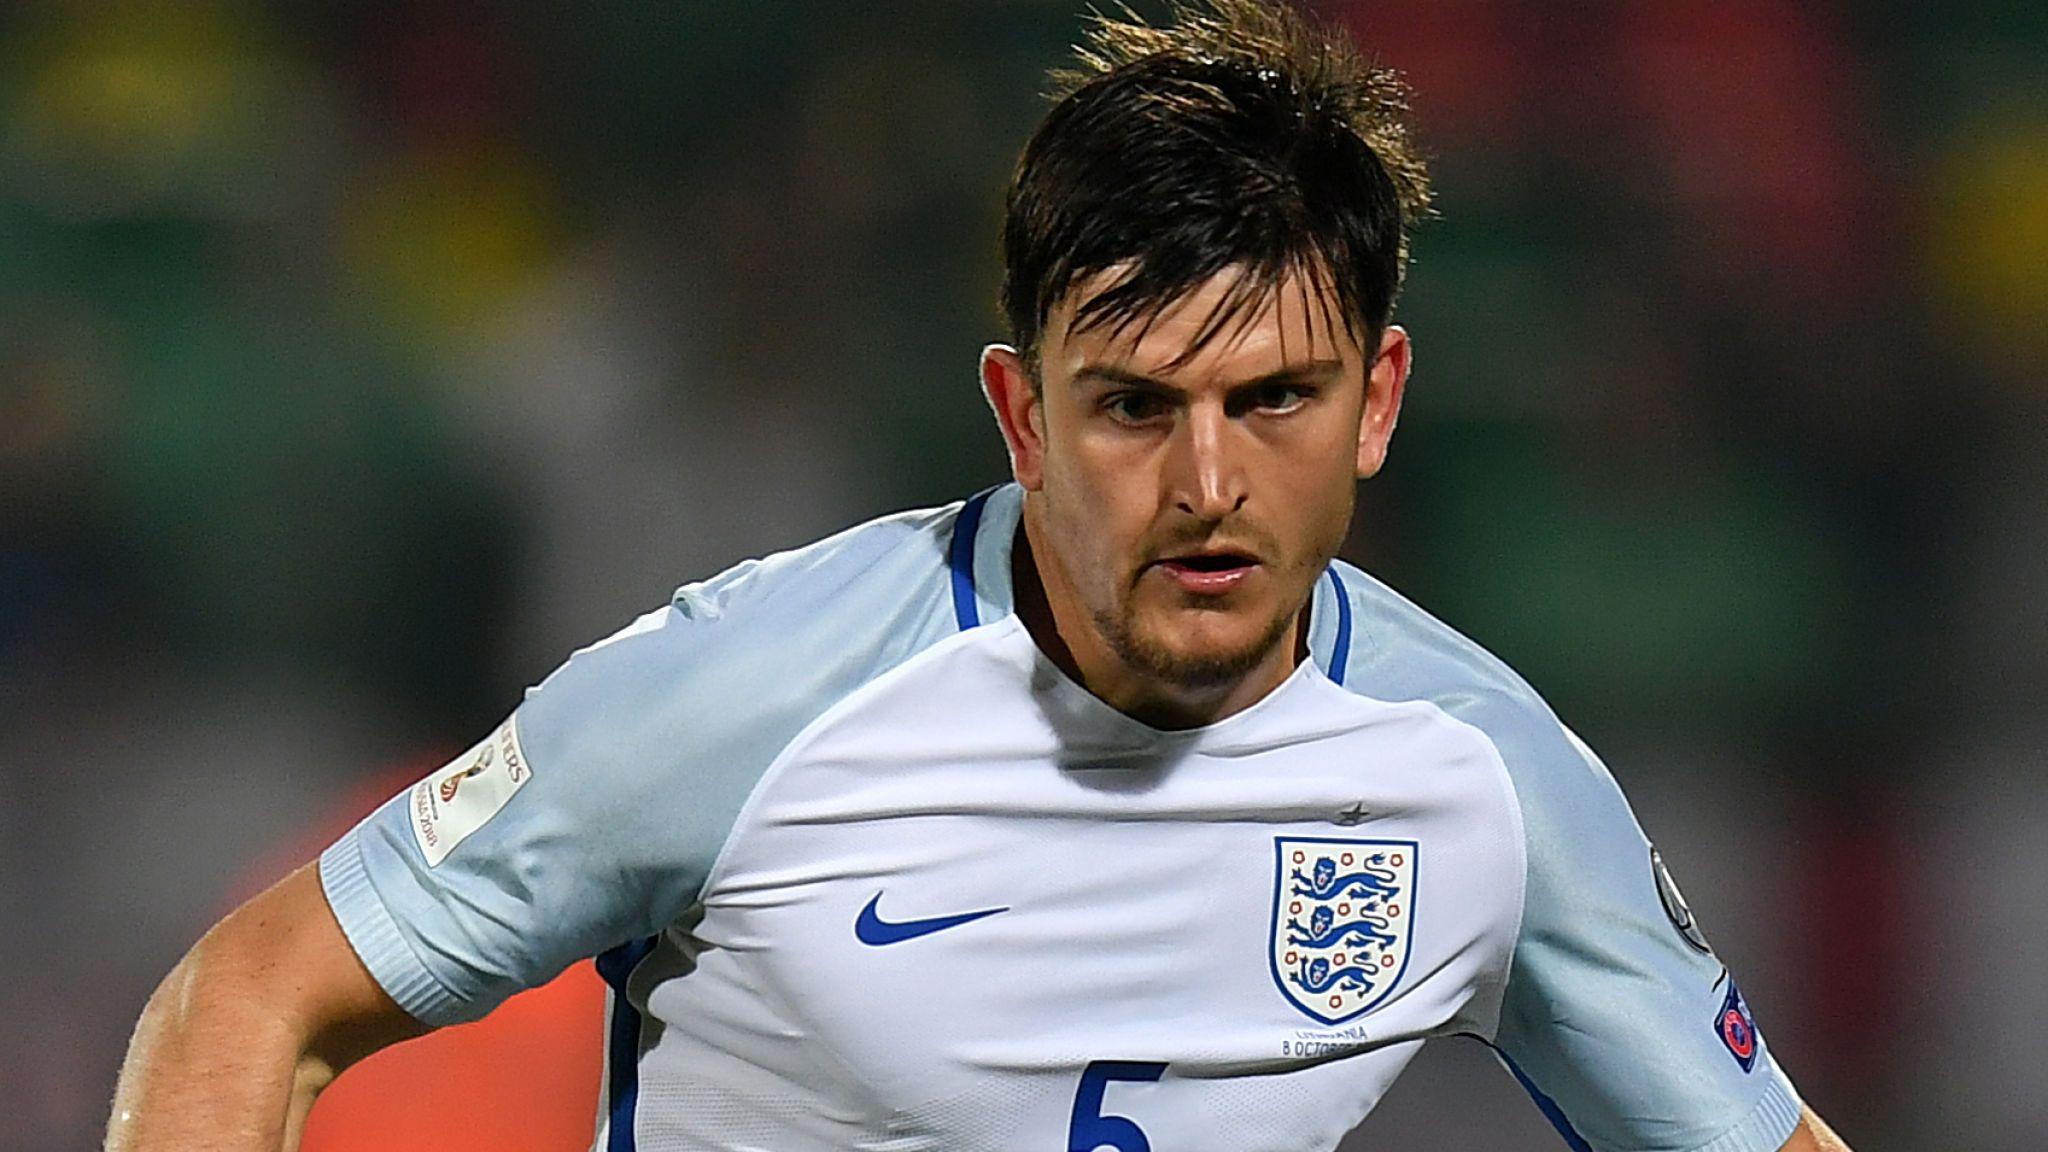 Leicester's Harry Maguire has sights set on England starting role at